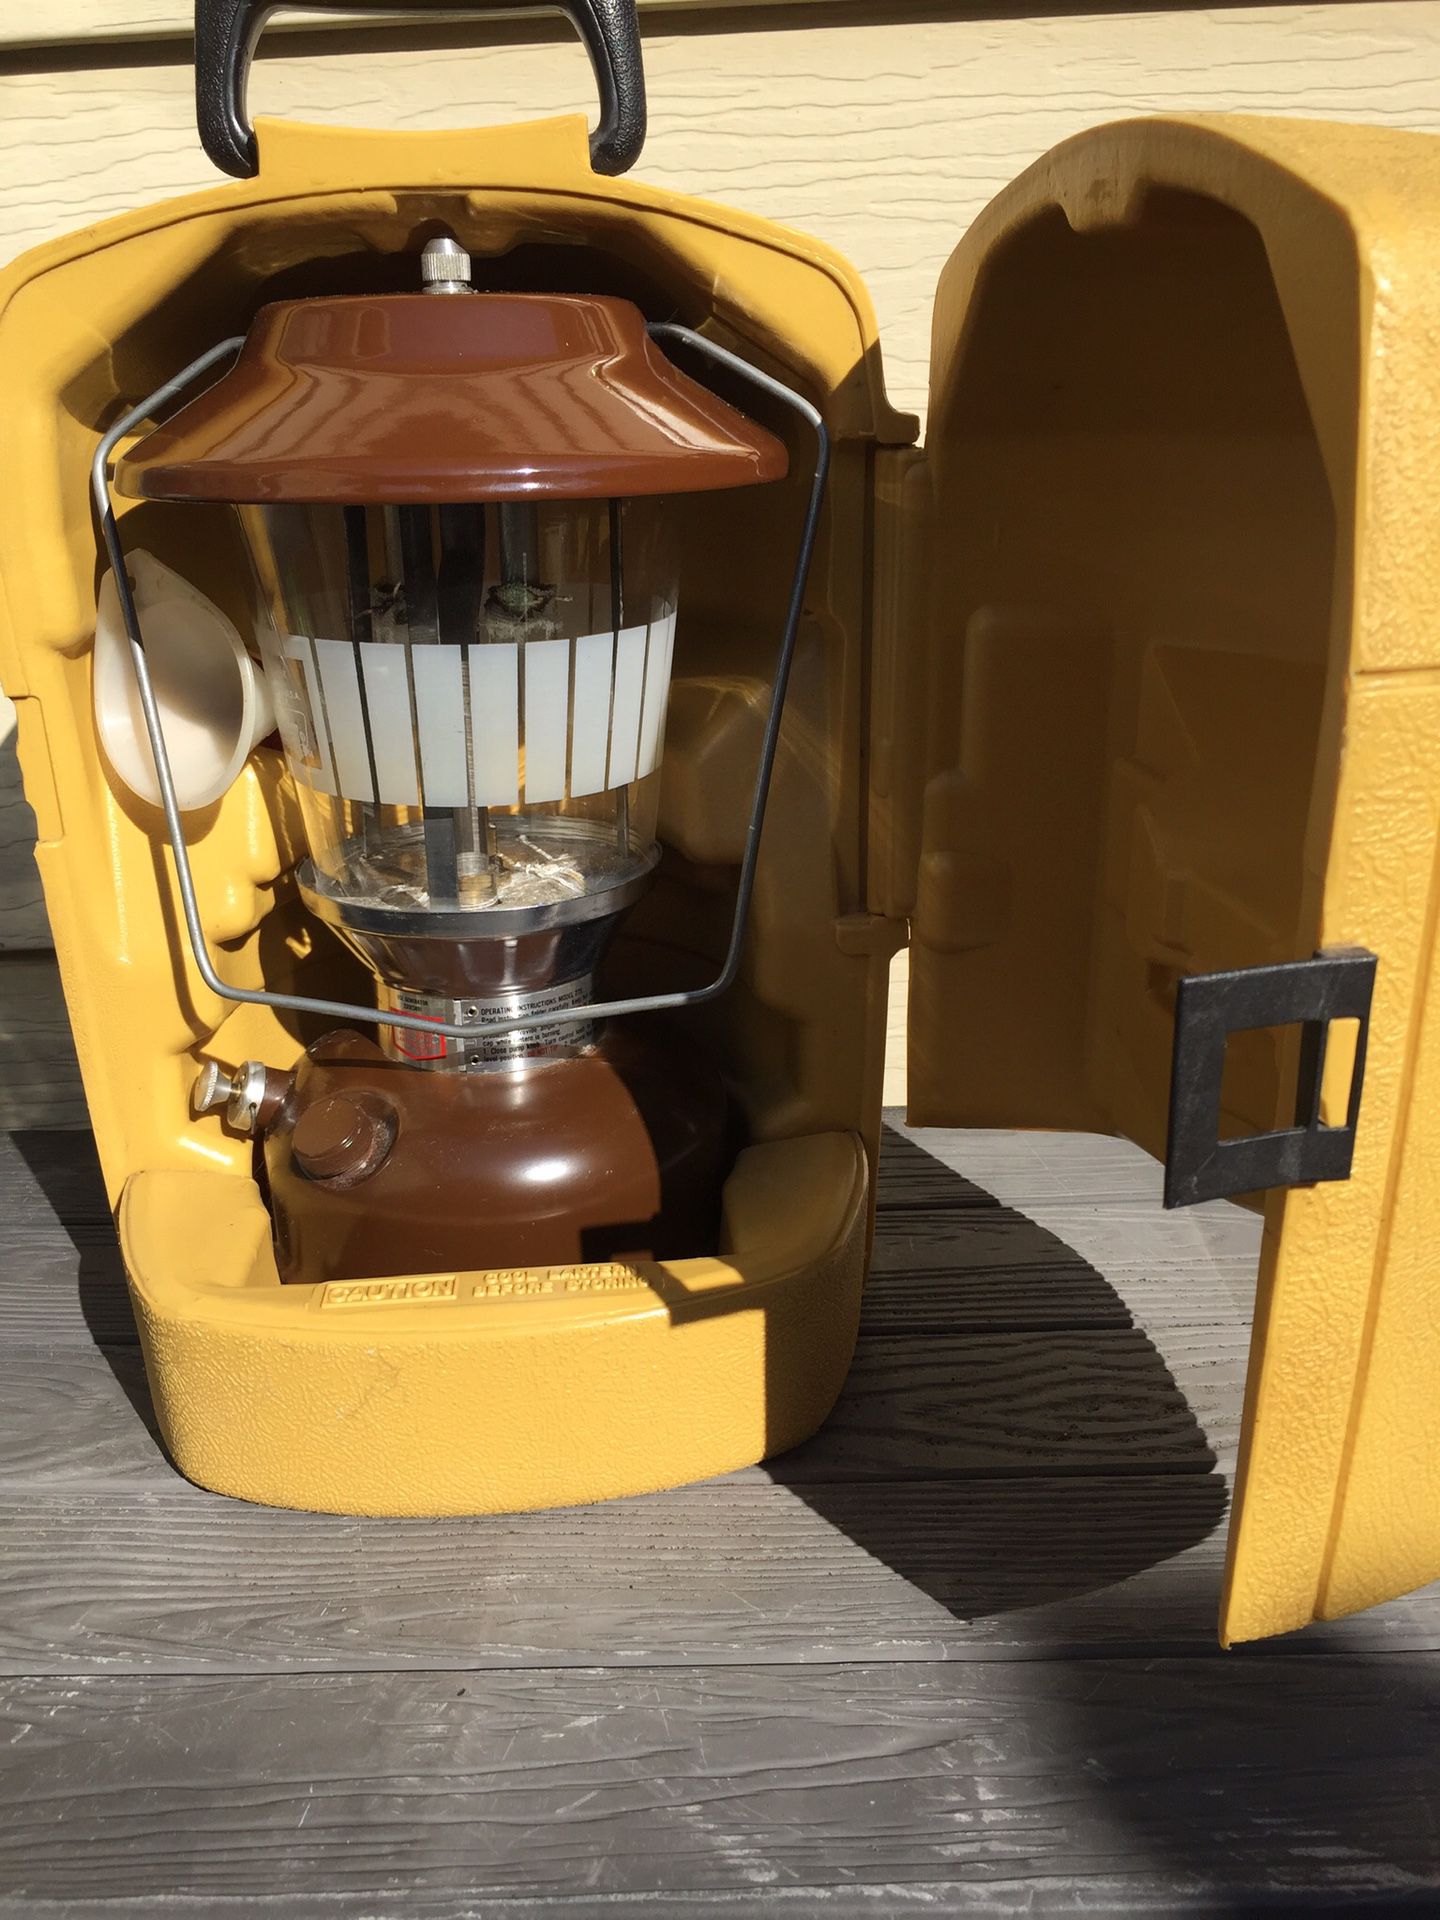 Coleman Lantern Model 275 in carrying case.